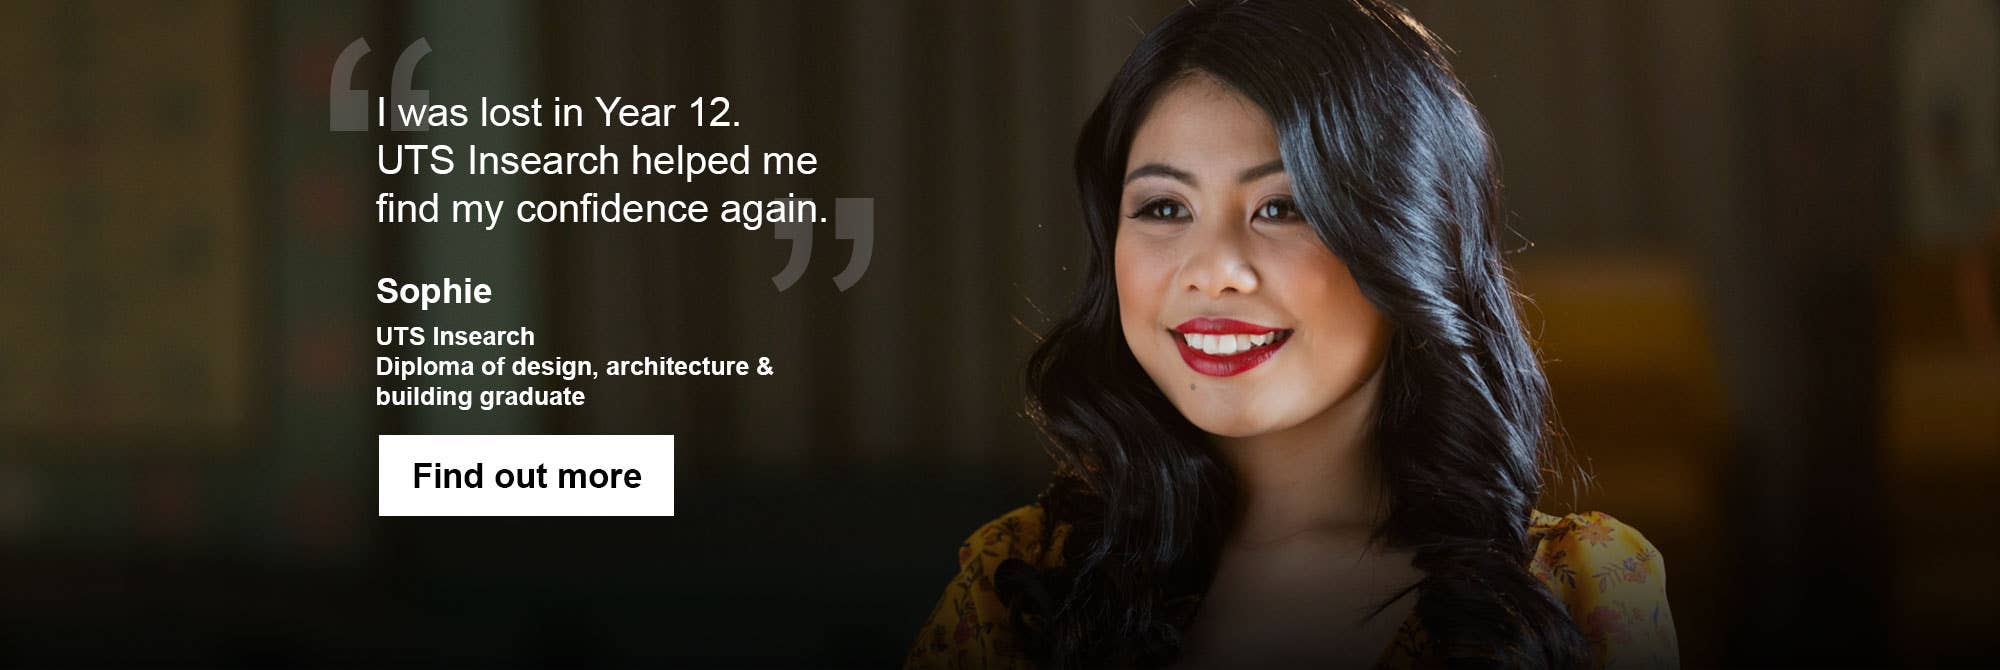 I was lost in year 12. UTS College helped me find my confidence again. - Sophie